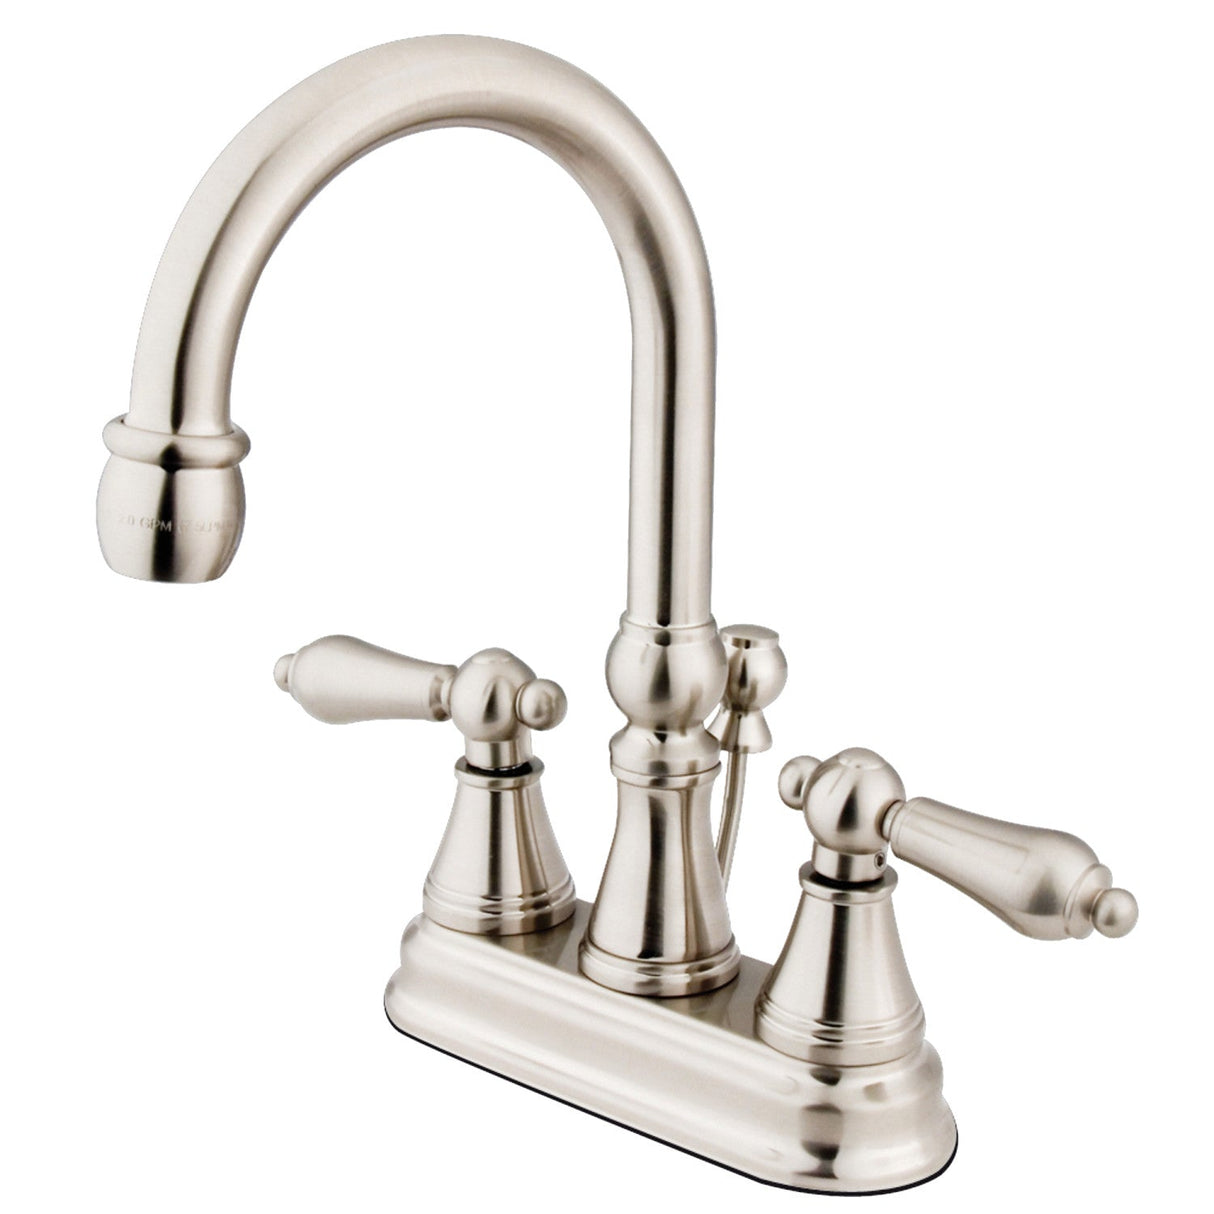 Governor KS2618AL Two-Handle 3-Hole Deck Mount 4" Centerset Bathroom Faucet with Brass Pop-Up, Brushed Nickel